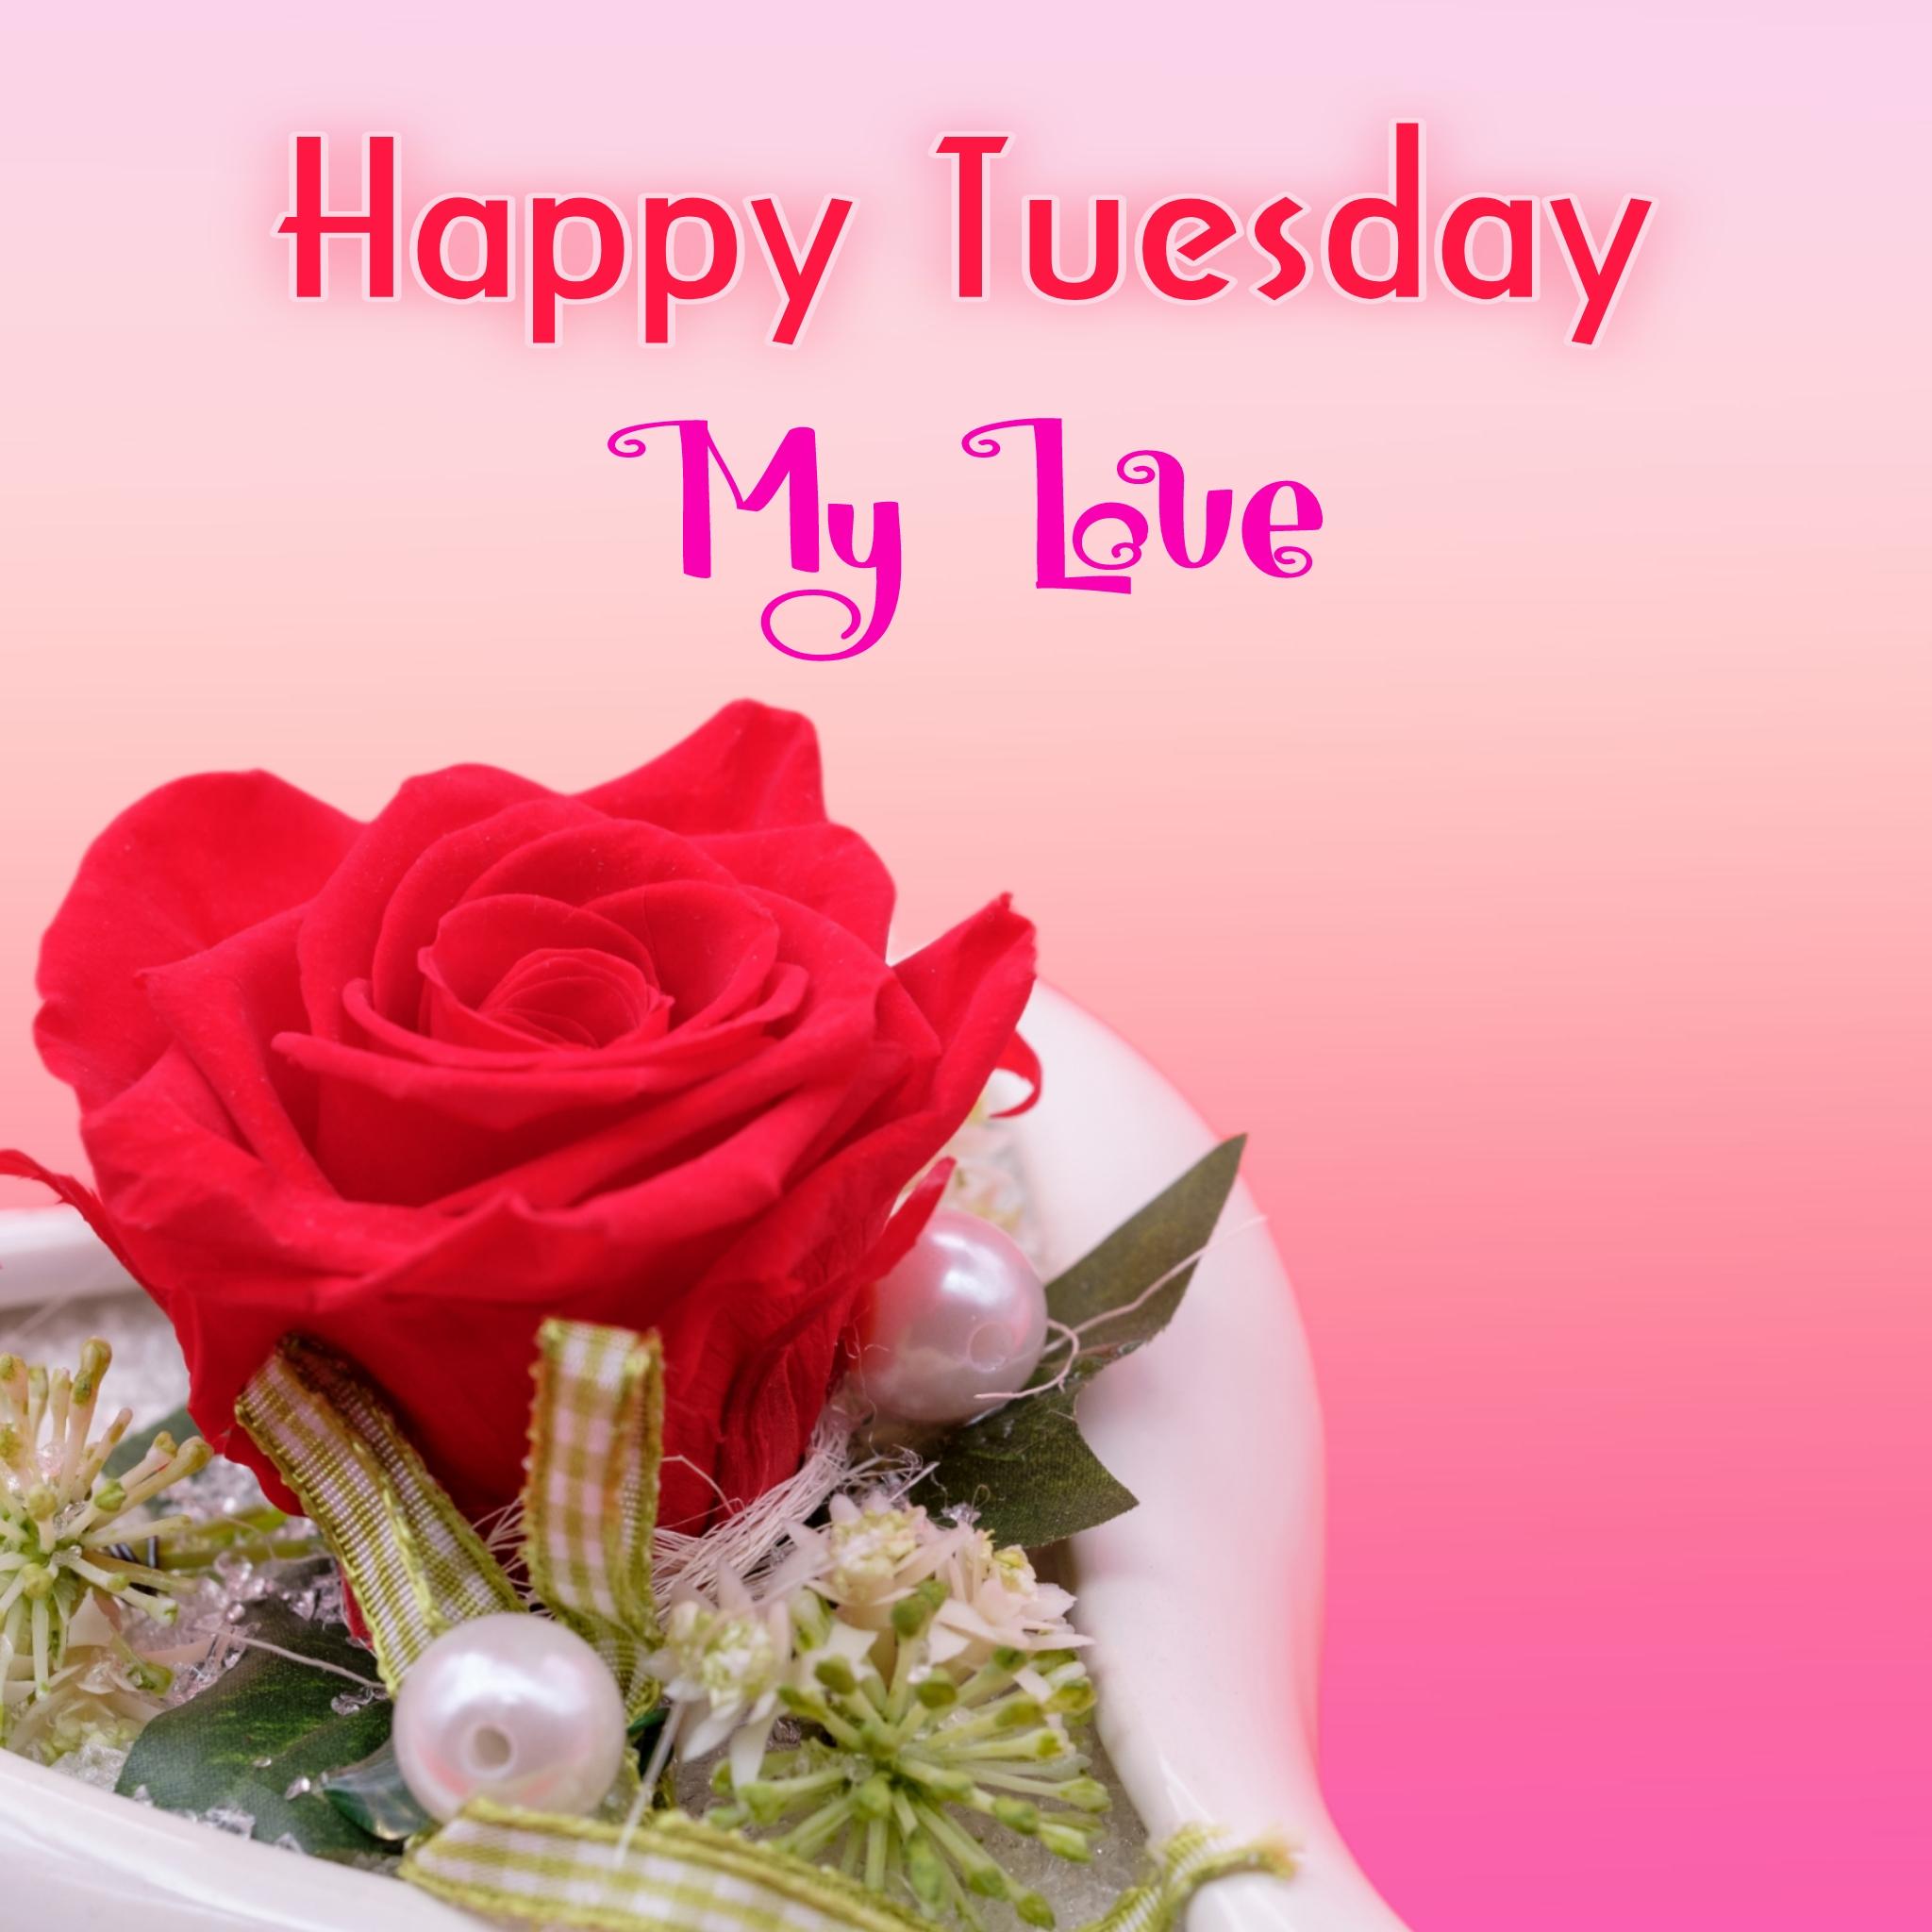 Happy Tuesday My Love Images for Husband